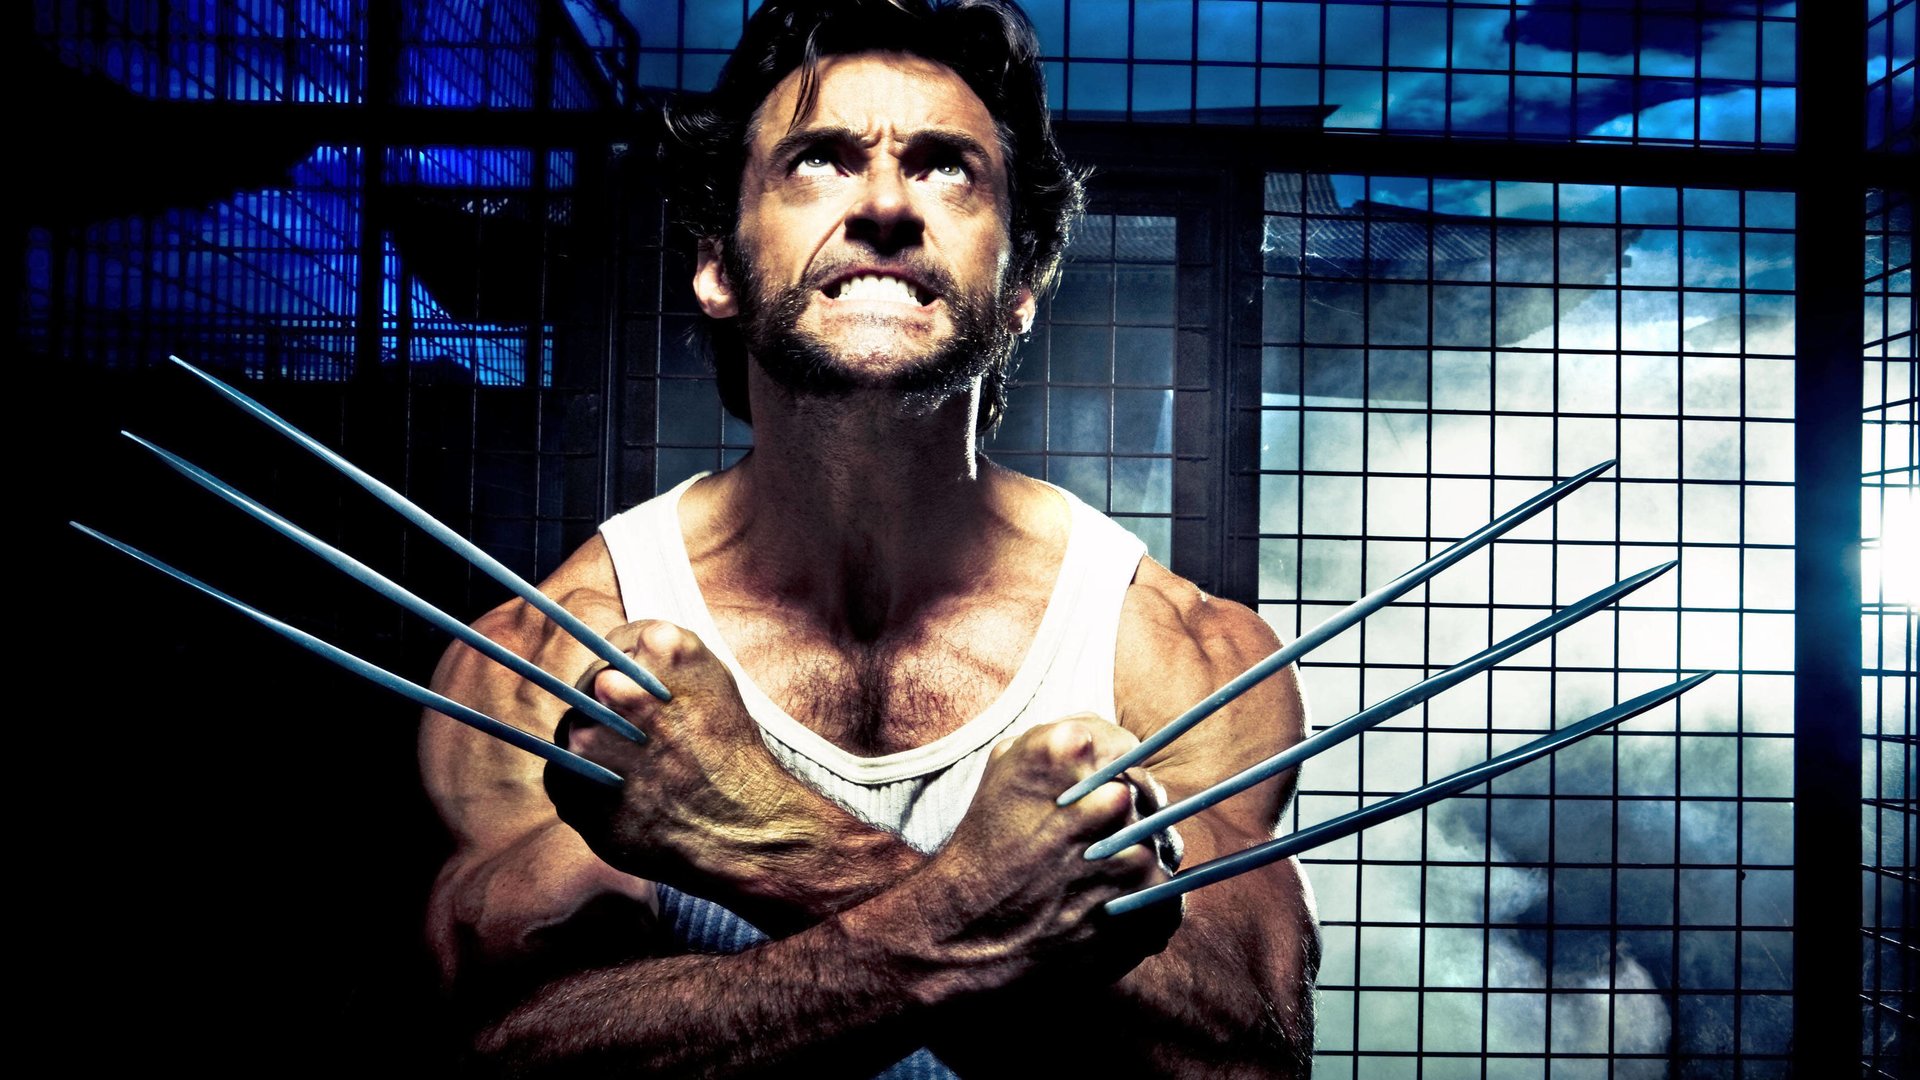 Found a new wolverine?  The Kingsman star has already met the head of the MCU for the role of Marvel